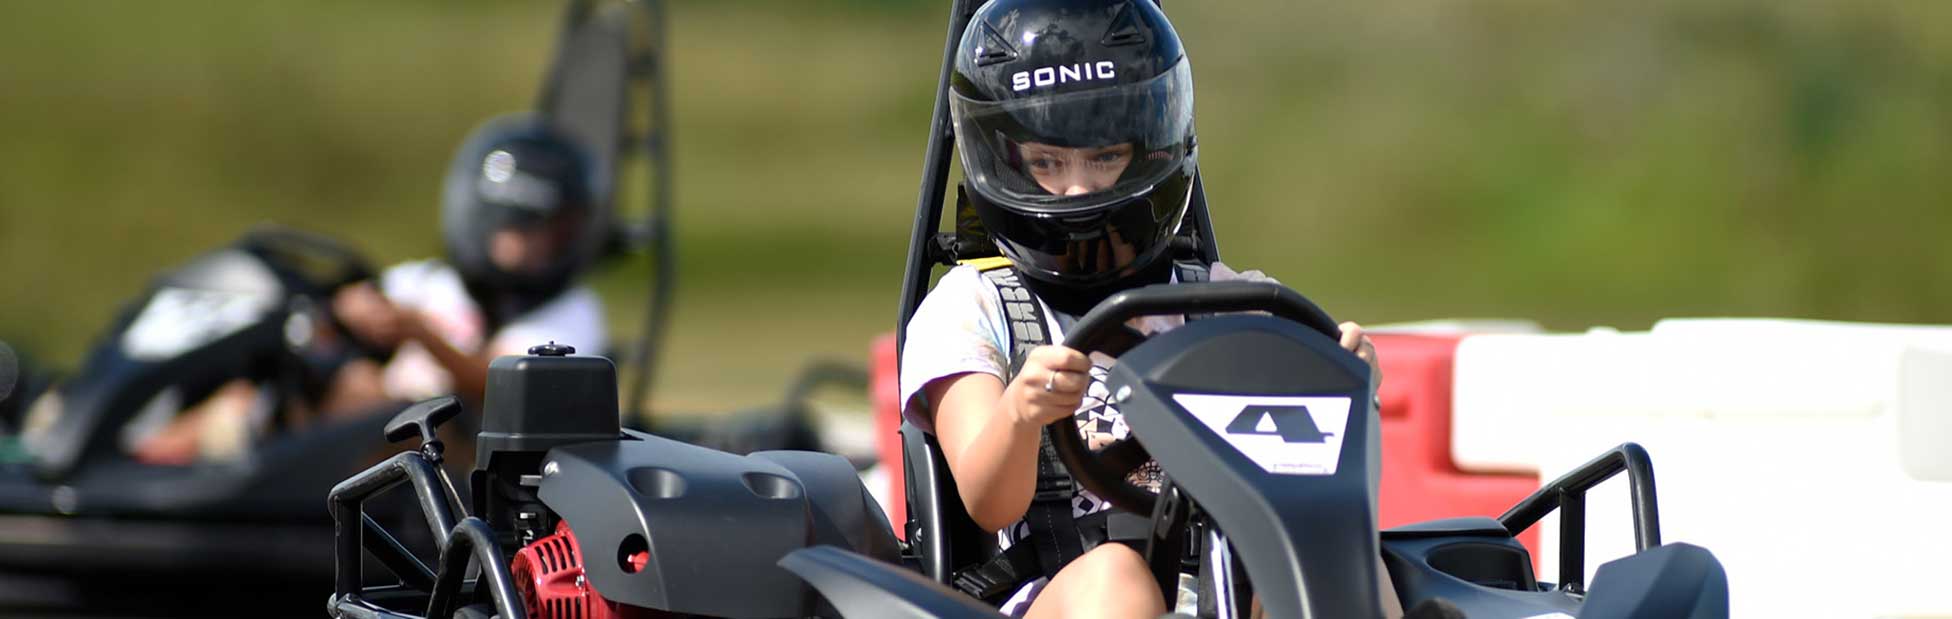 A young girl driving a go kart